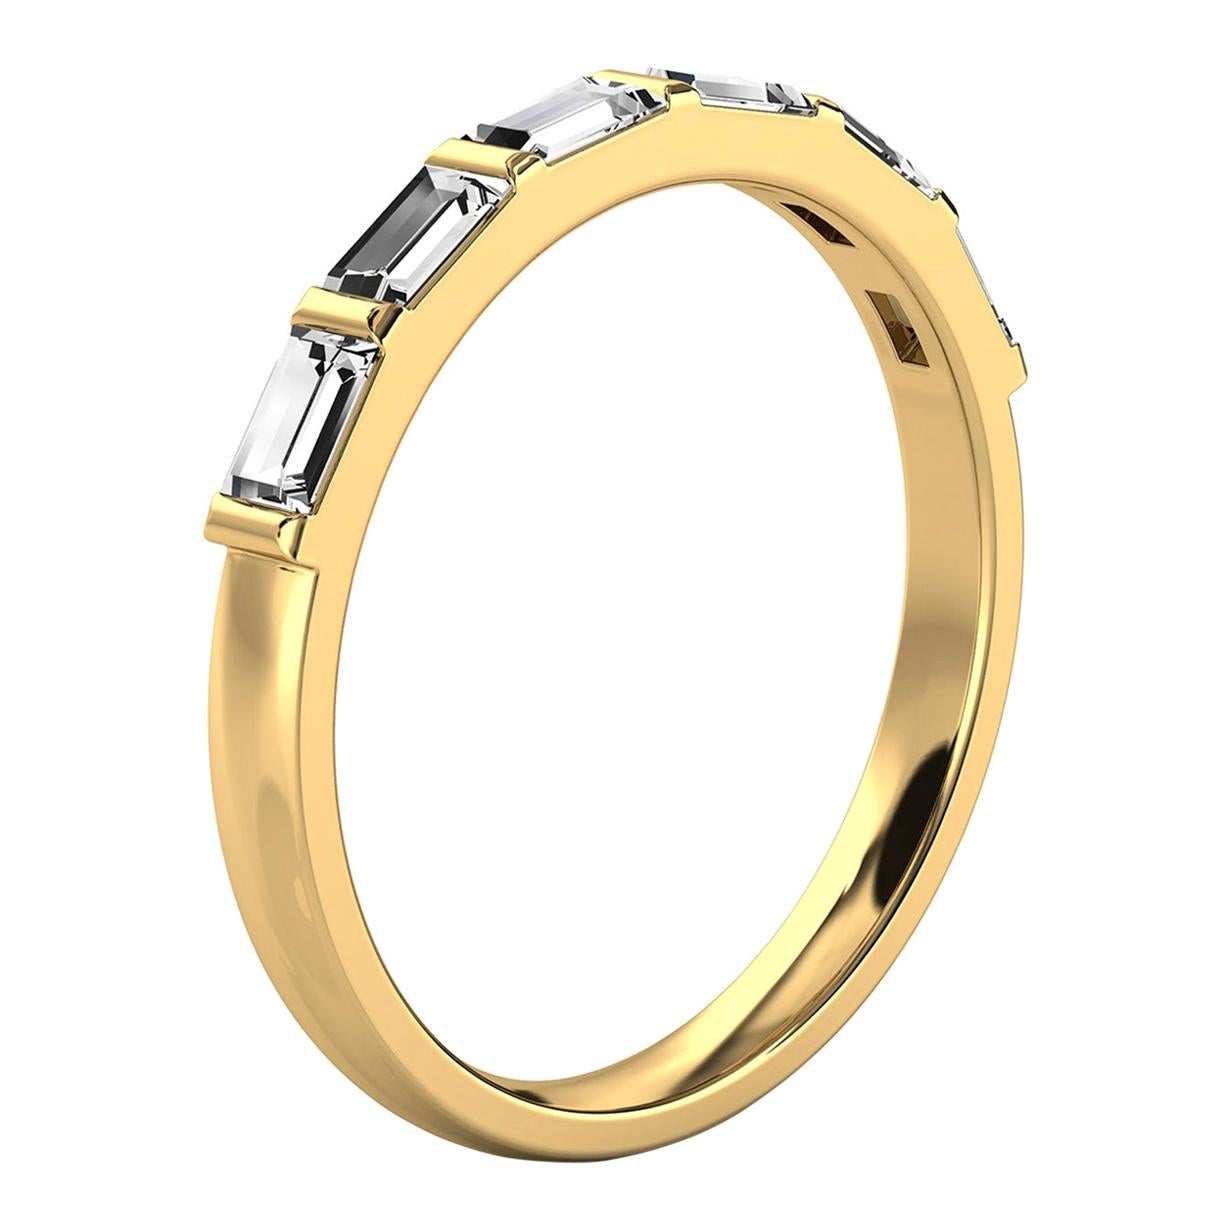 14k Yellow Gold Lindie Baguette Organic Design Diamond Ring '1/2 Ct. Tw' For Sale